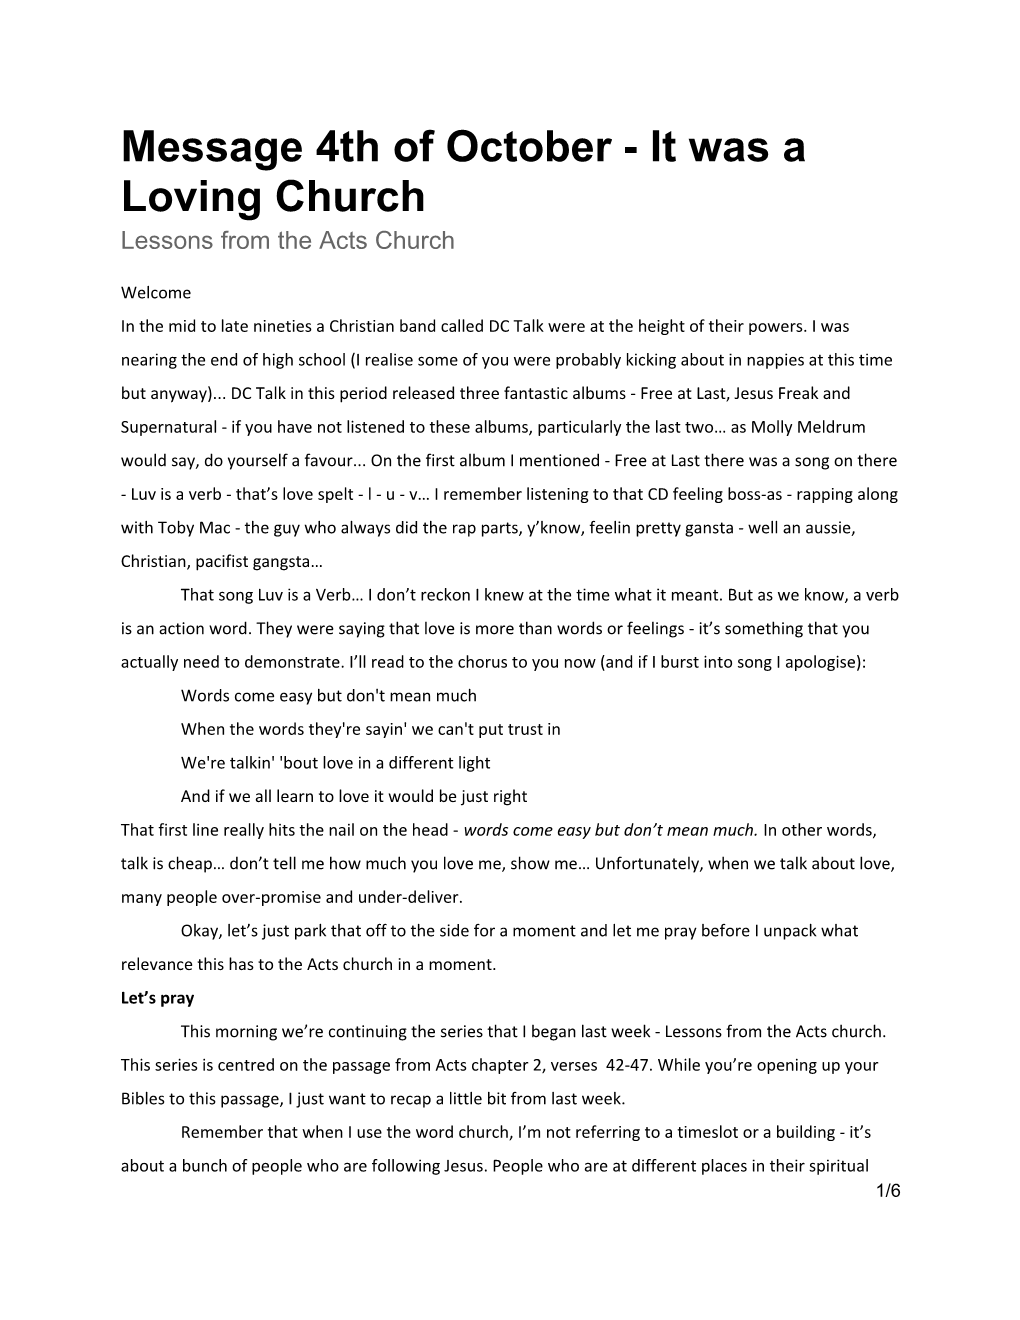 Message 4Th of October - It Was a Loving Church